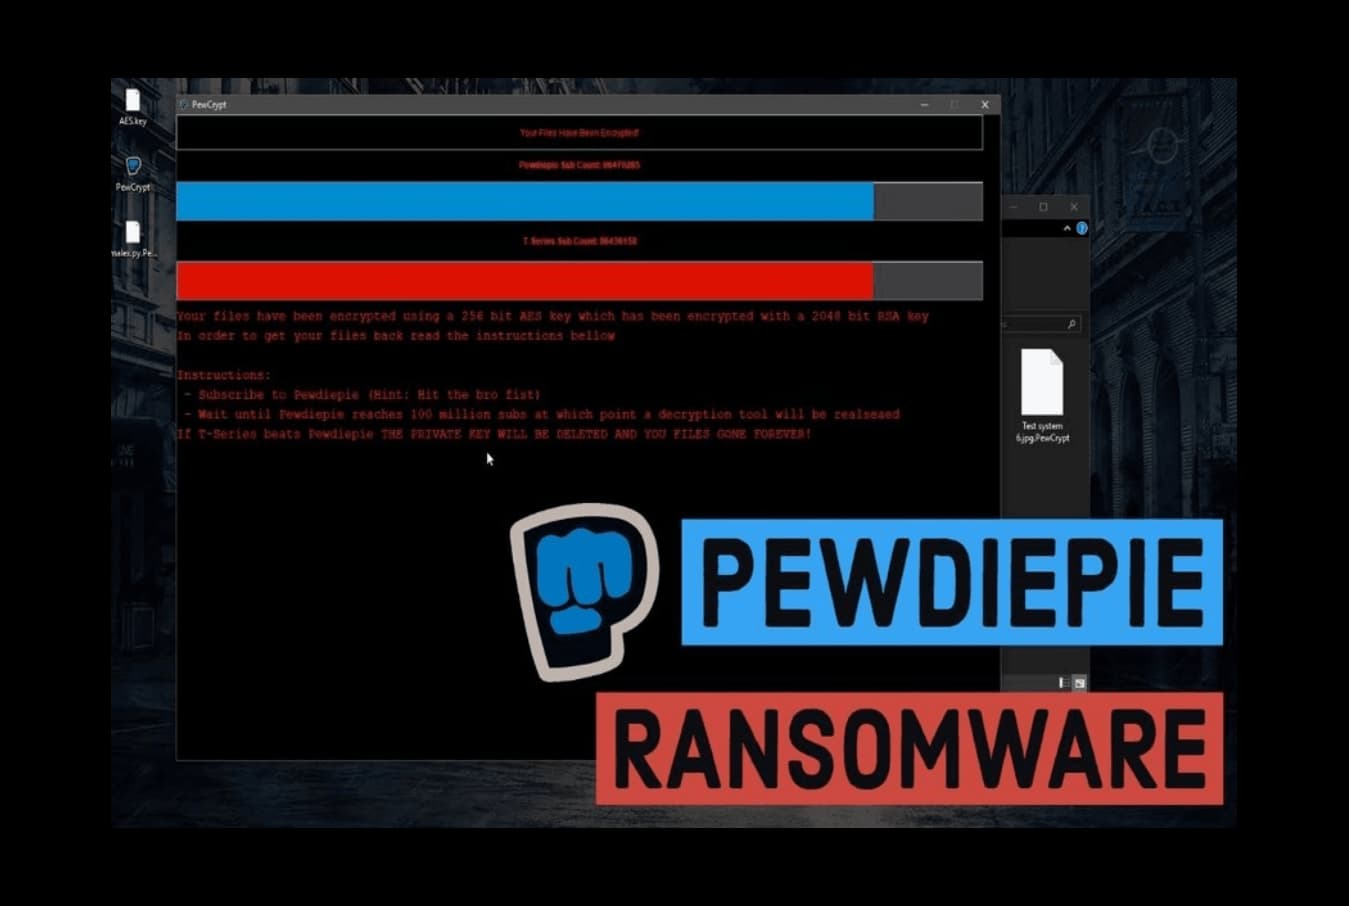 PewDiePie ransomware forcing users to subscribe him on YouTube